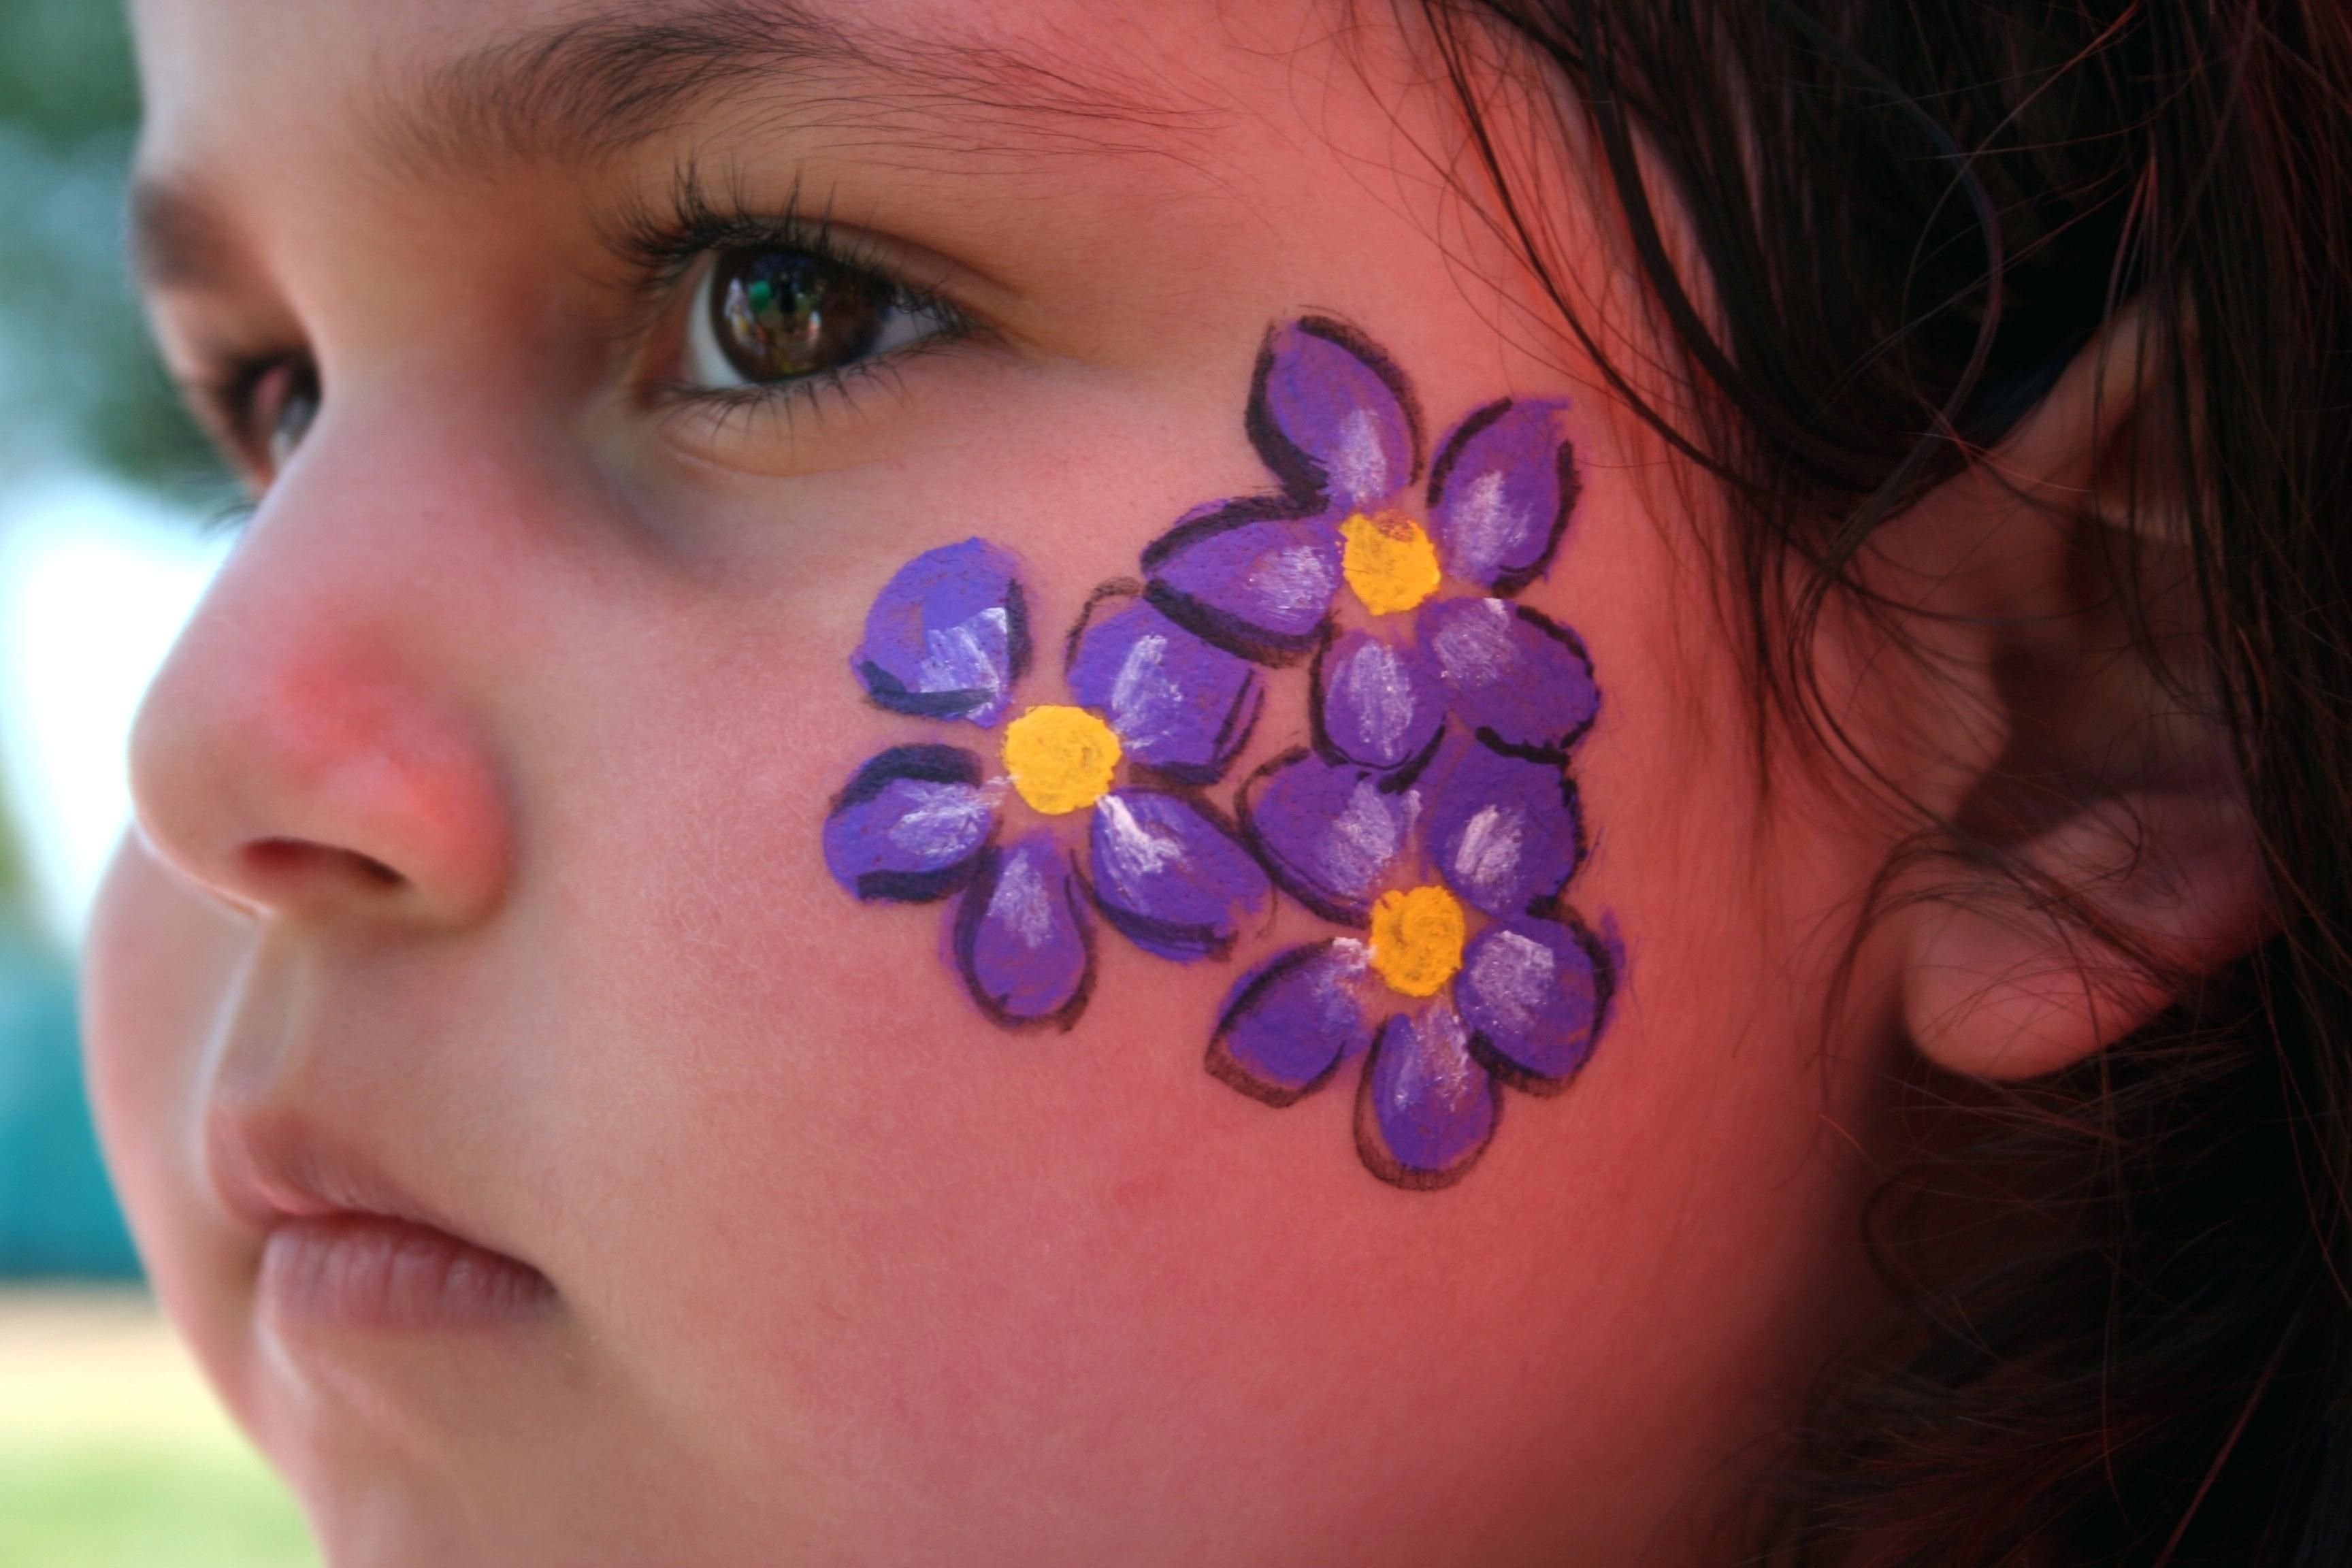 10 Best Easy Face Painting Ideas For Cheeks image result for face painting for girls simple face painting 2022